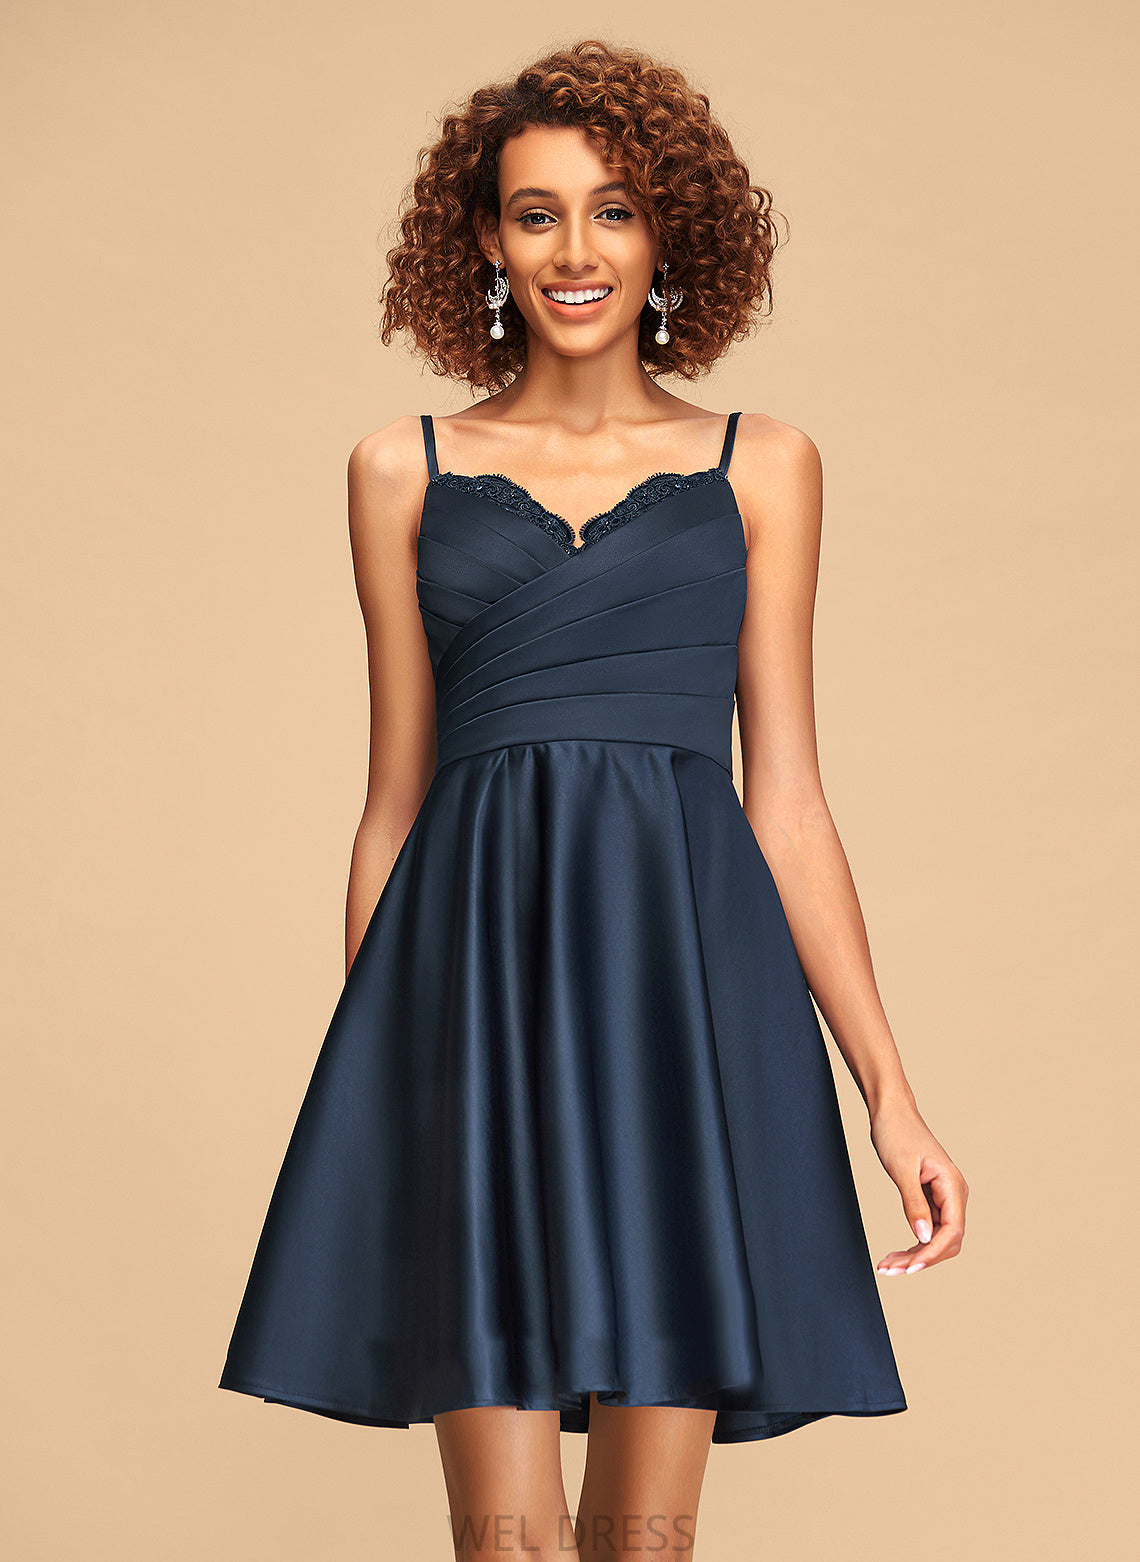 Dominique Homecoming Dresses Short/Mini Sequins A-Line Beading Homecoming Dress With V-neck Satin Ruffle